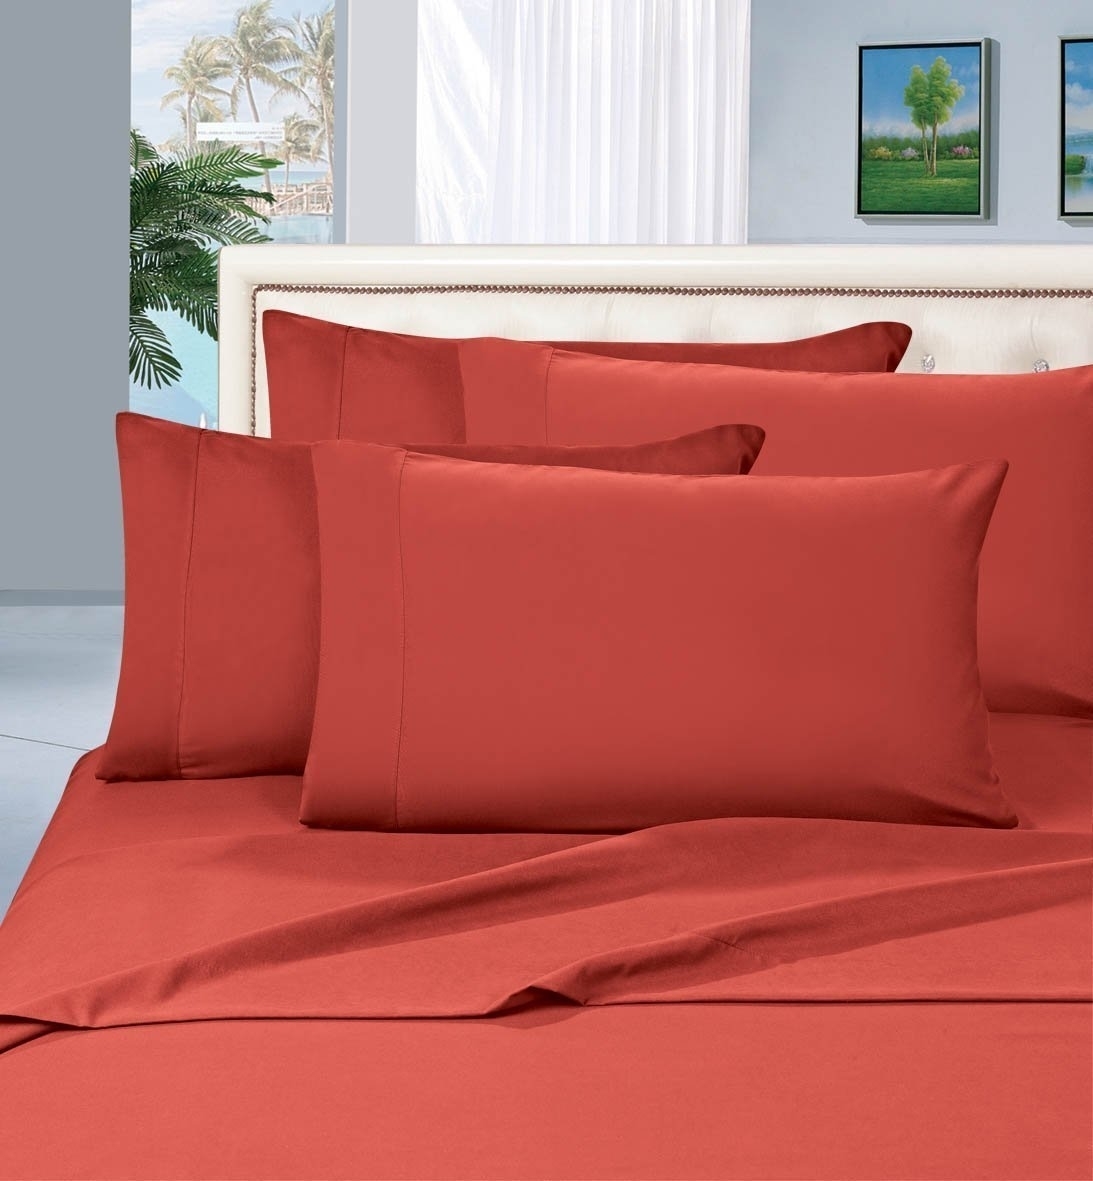 Elegant Comfort 1500 Series Wrinkle Resistant Egyptian Quality Hypoallergenic Ultra Soft Luxury 4-piece Bed Sheet Set, Full, Rust